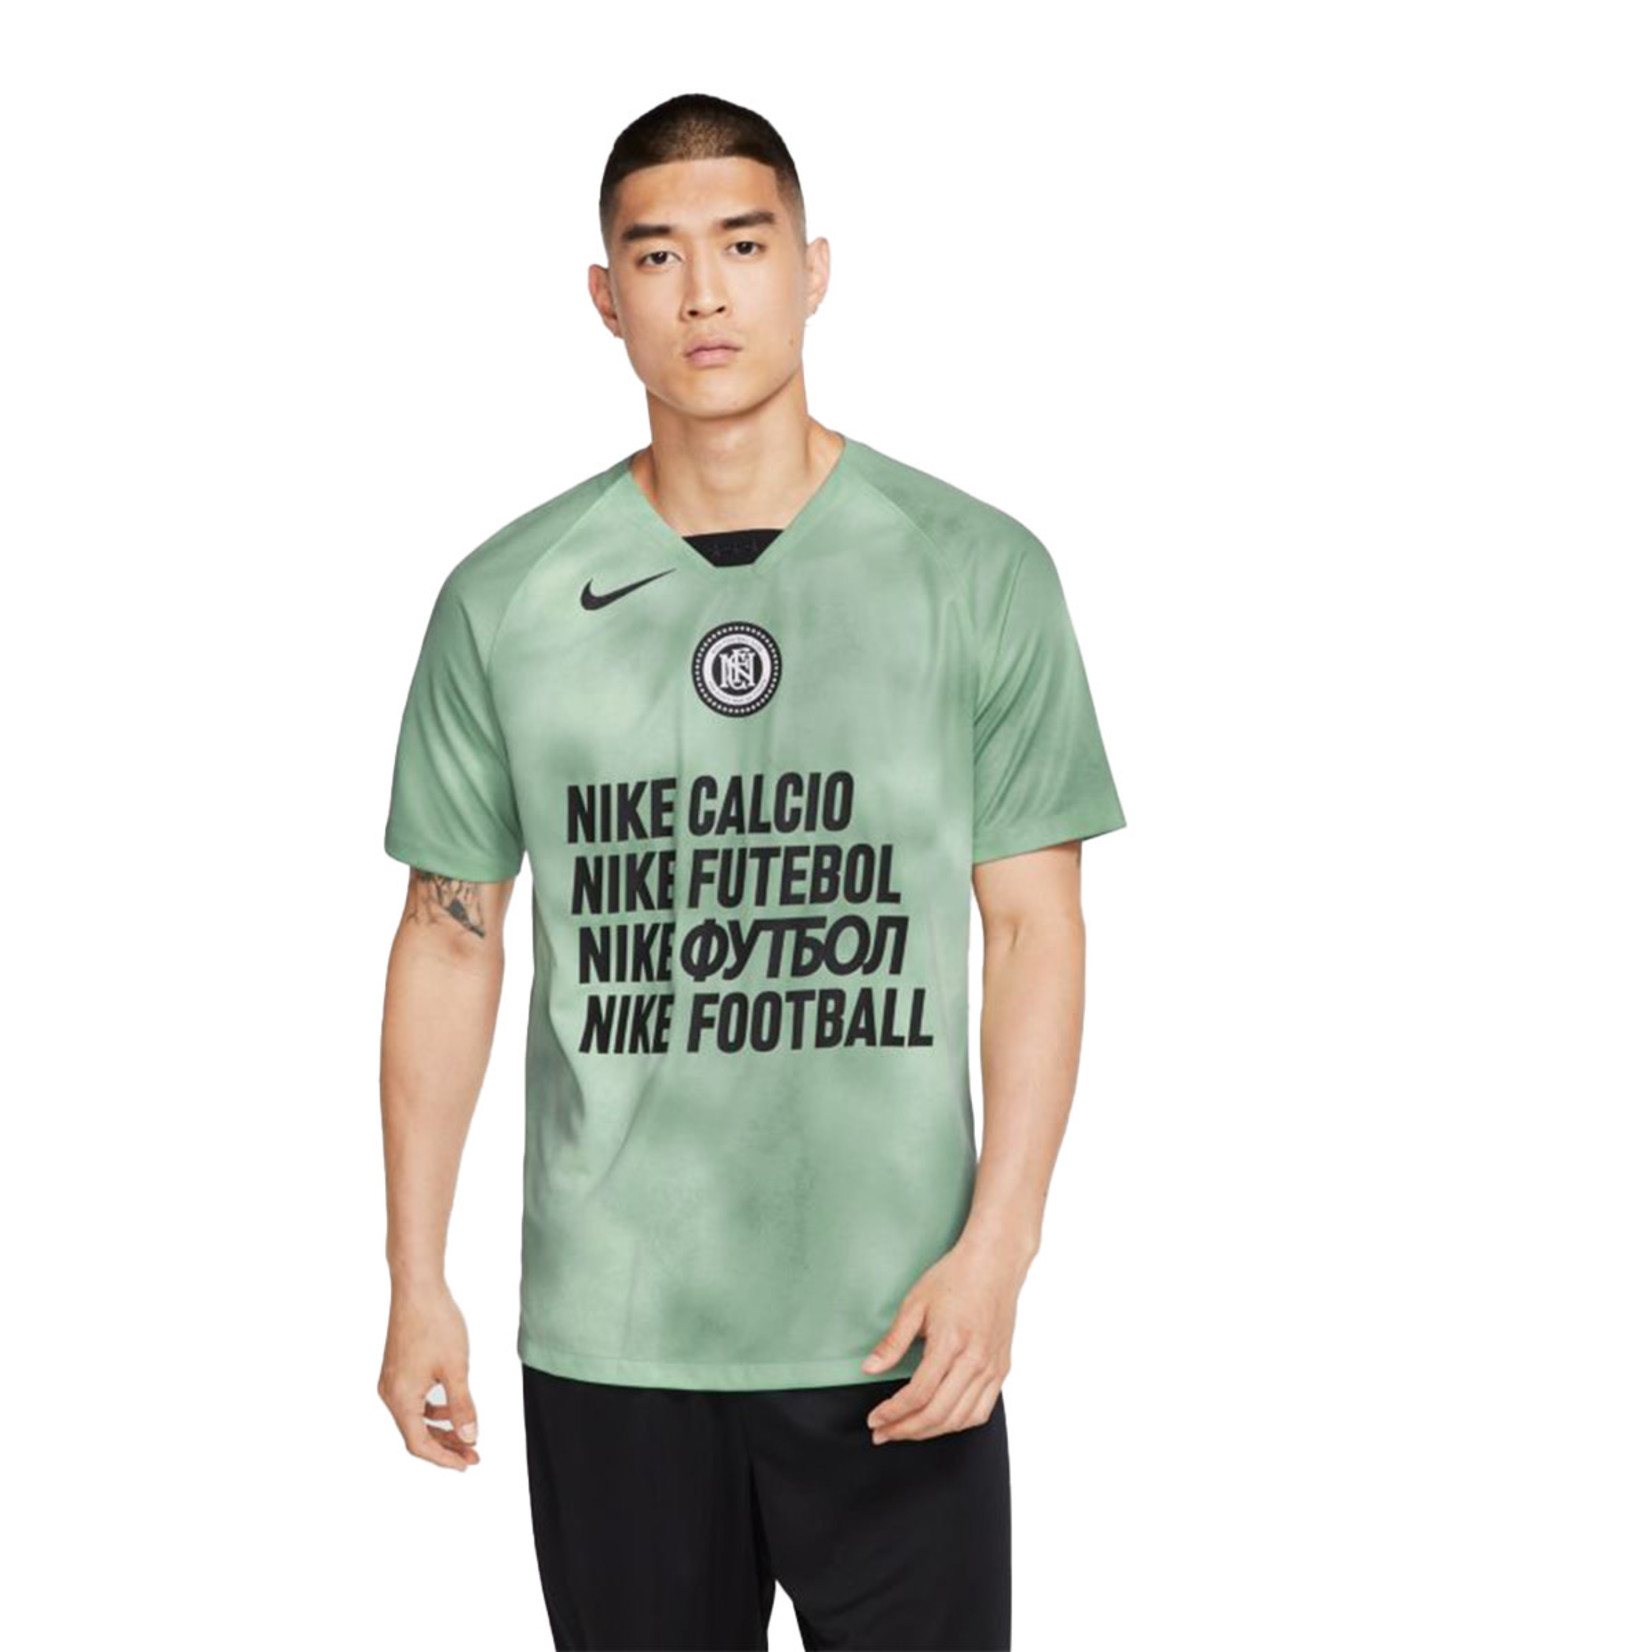 The Best Nike American Football Training Jerseys and Gear. Nike CH